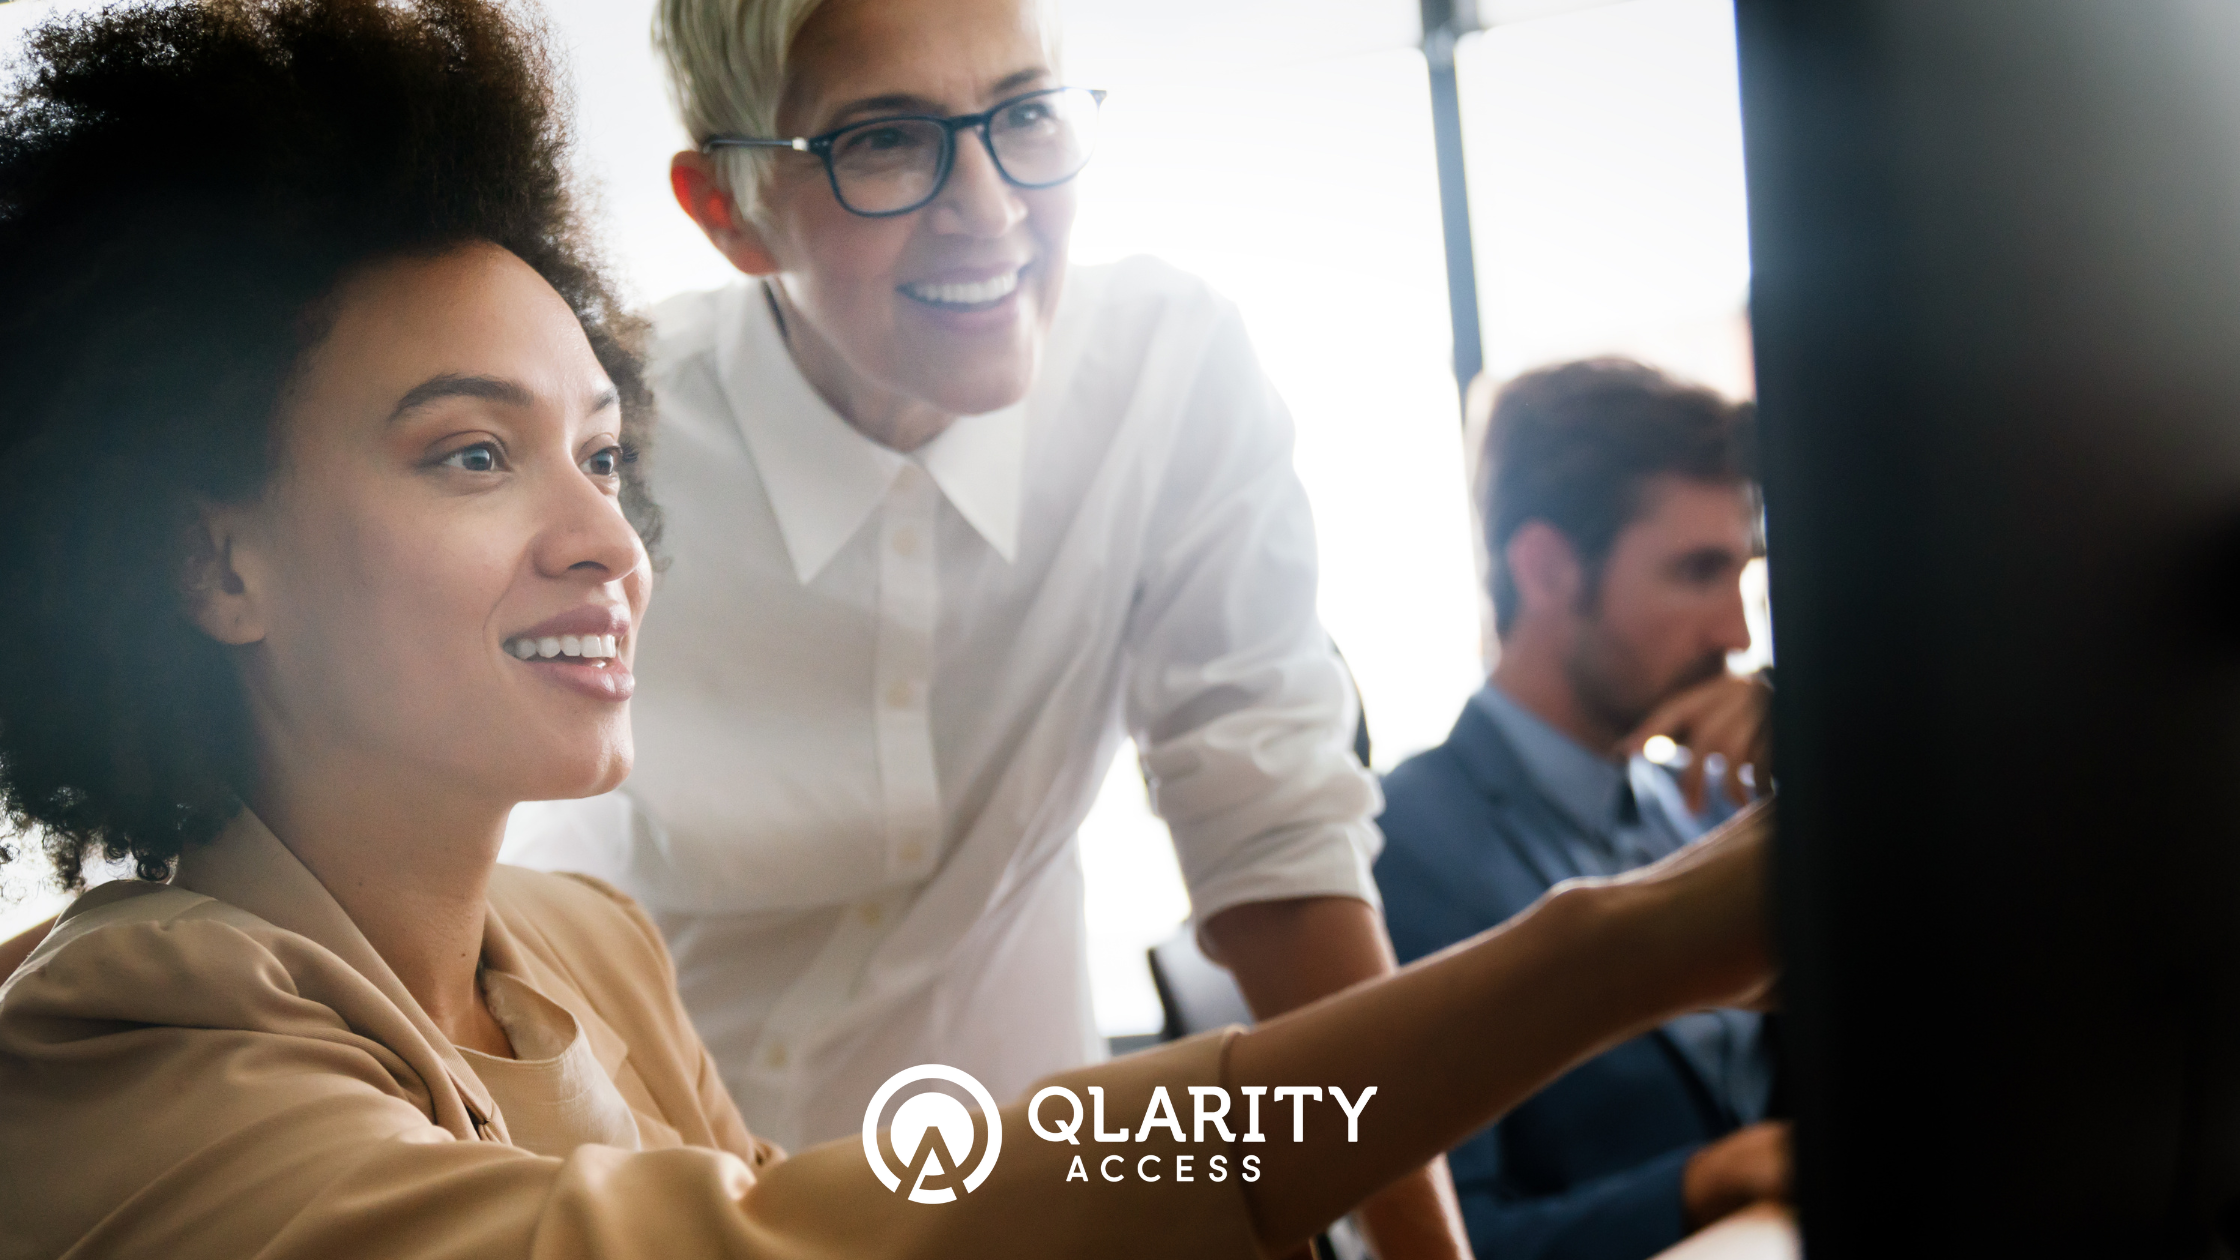 3 Ways Qlarity Access' Proven Process Delivers Confidence